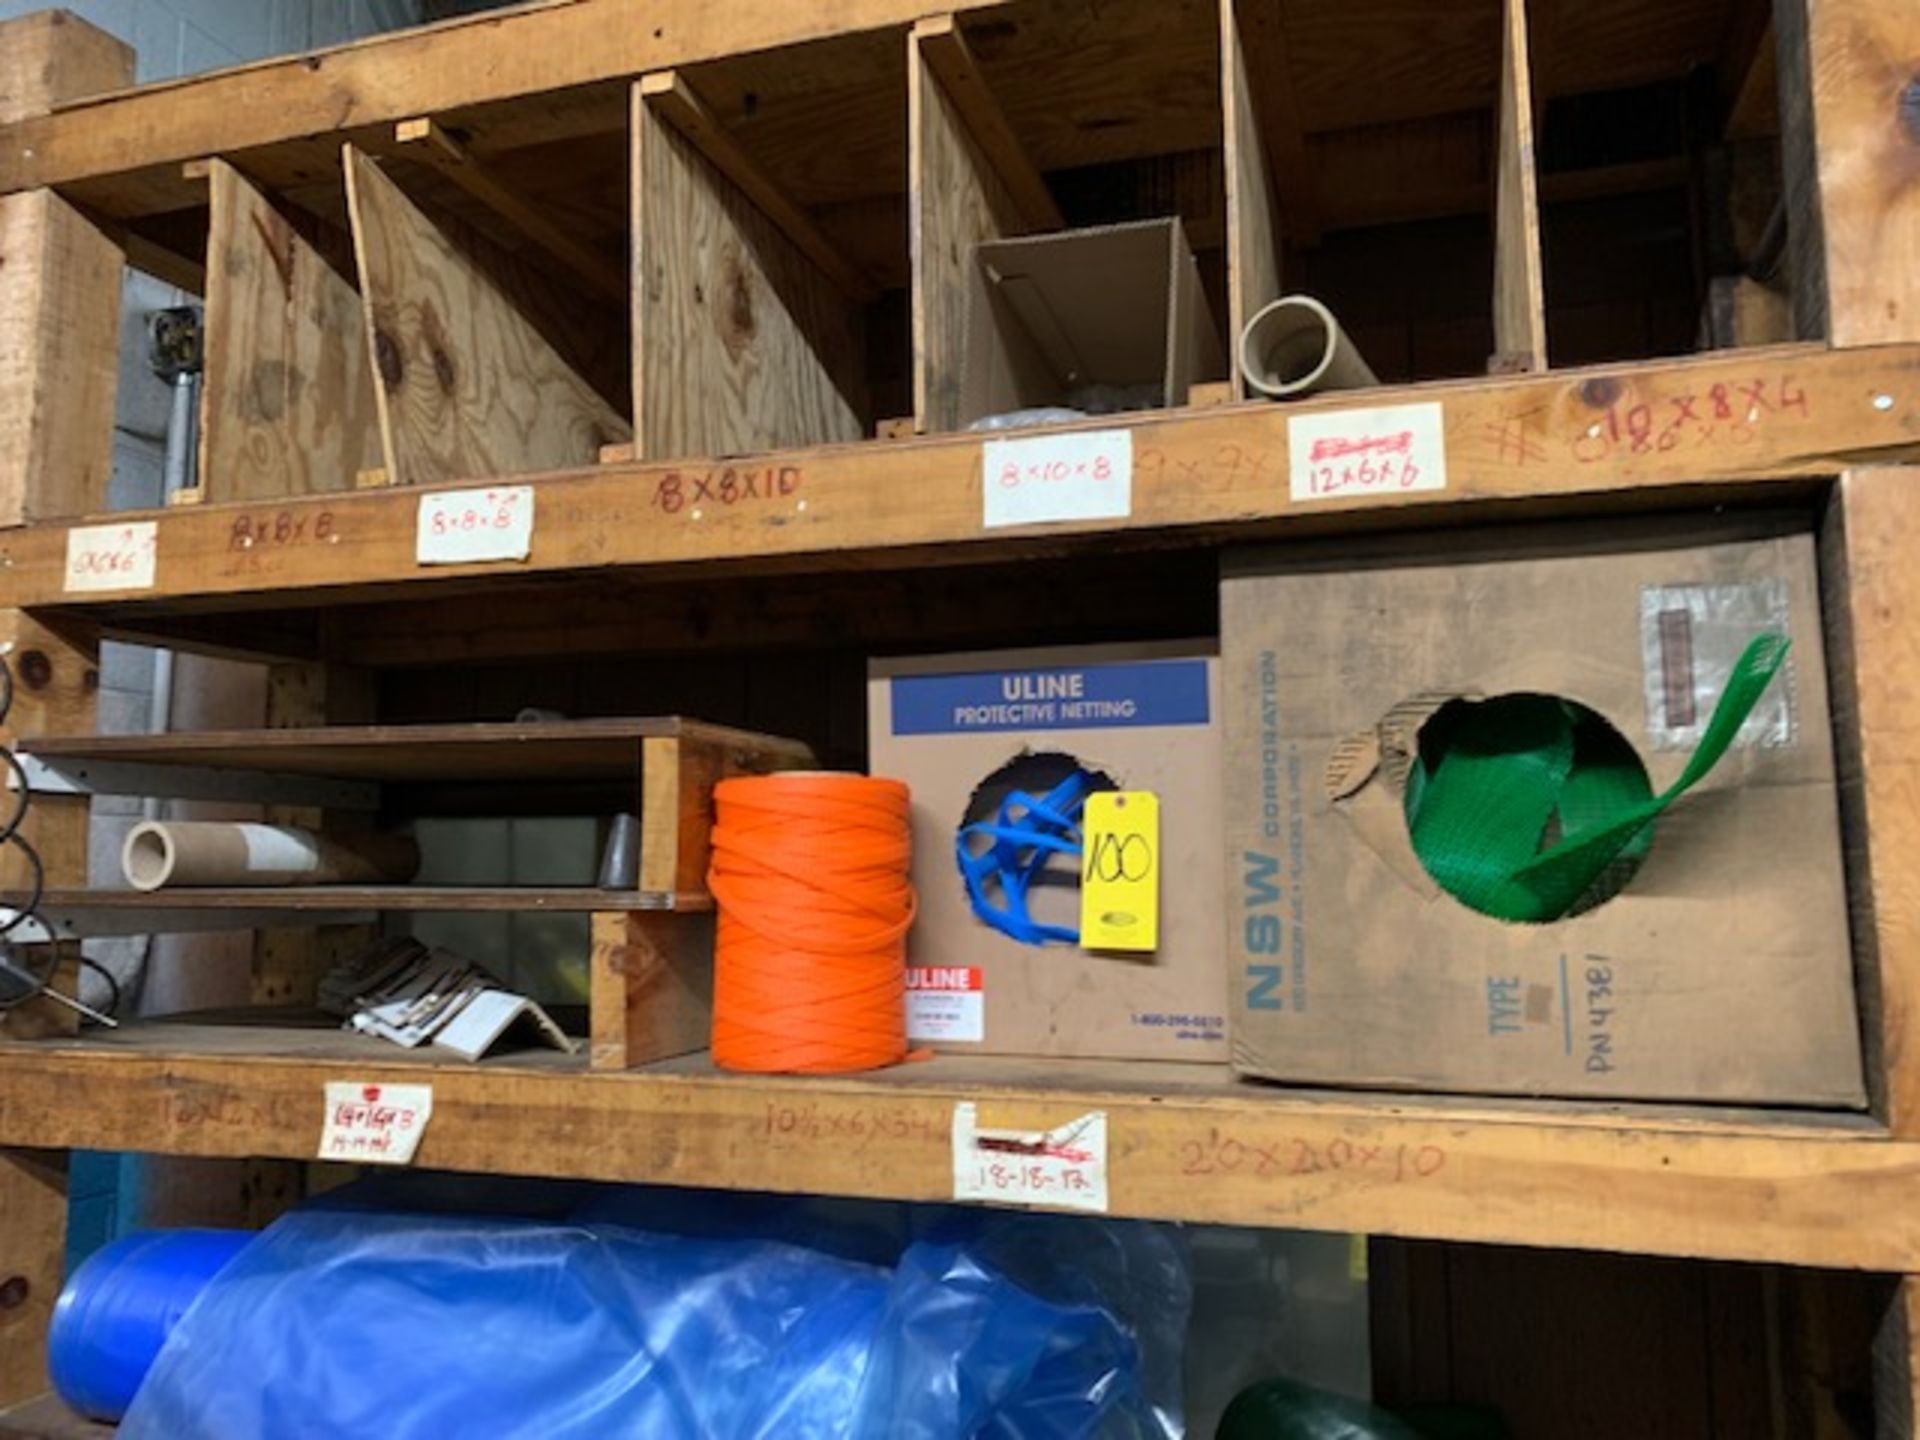 PROTECTIVE TOOL NETTING, (2) ROLLS OF PLASTIC SHEETING, ASSORTED CORRUGATED BOXES... - Image 2 of 3